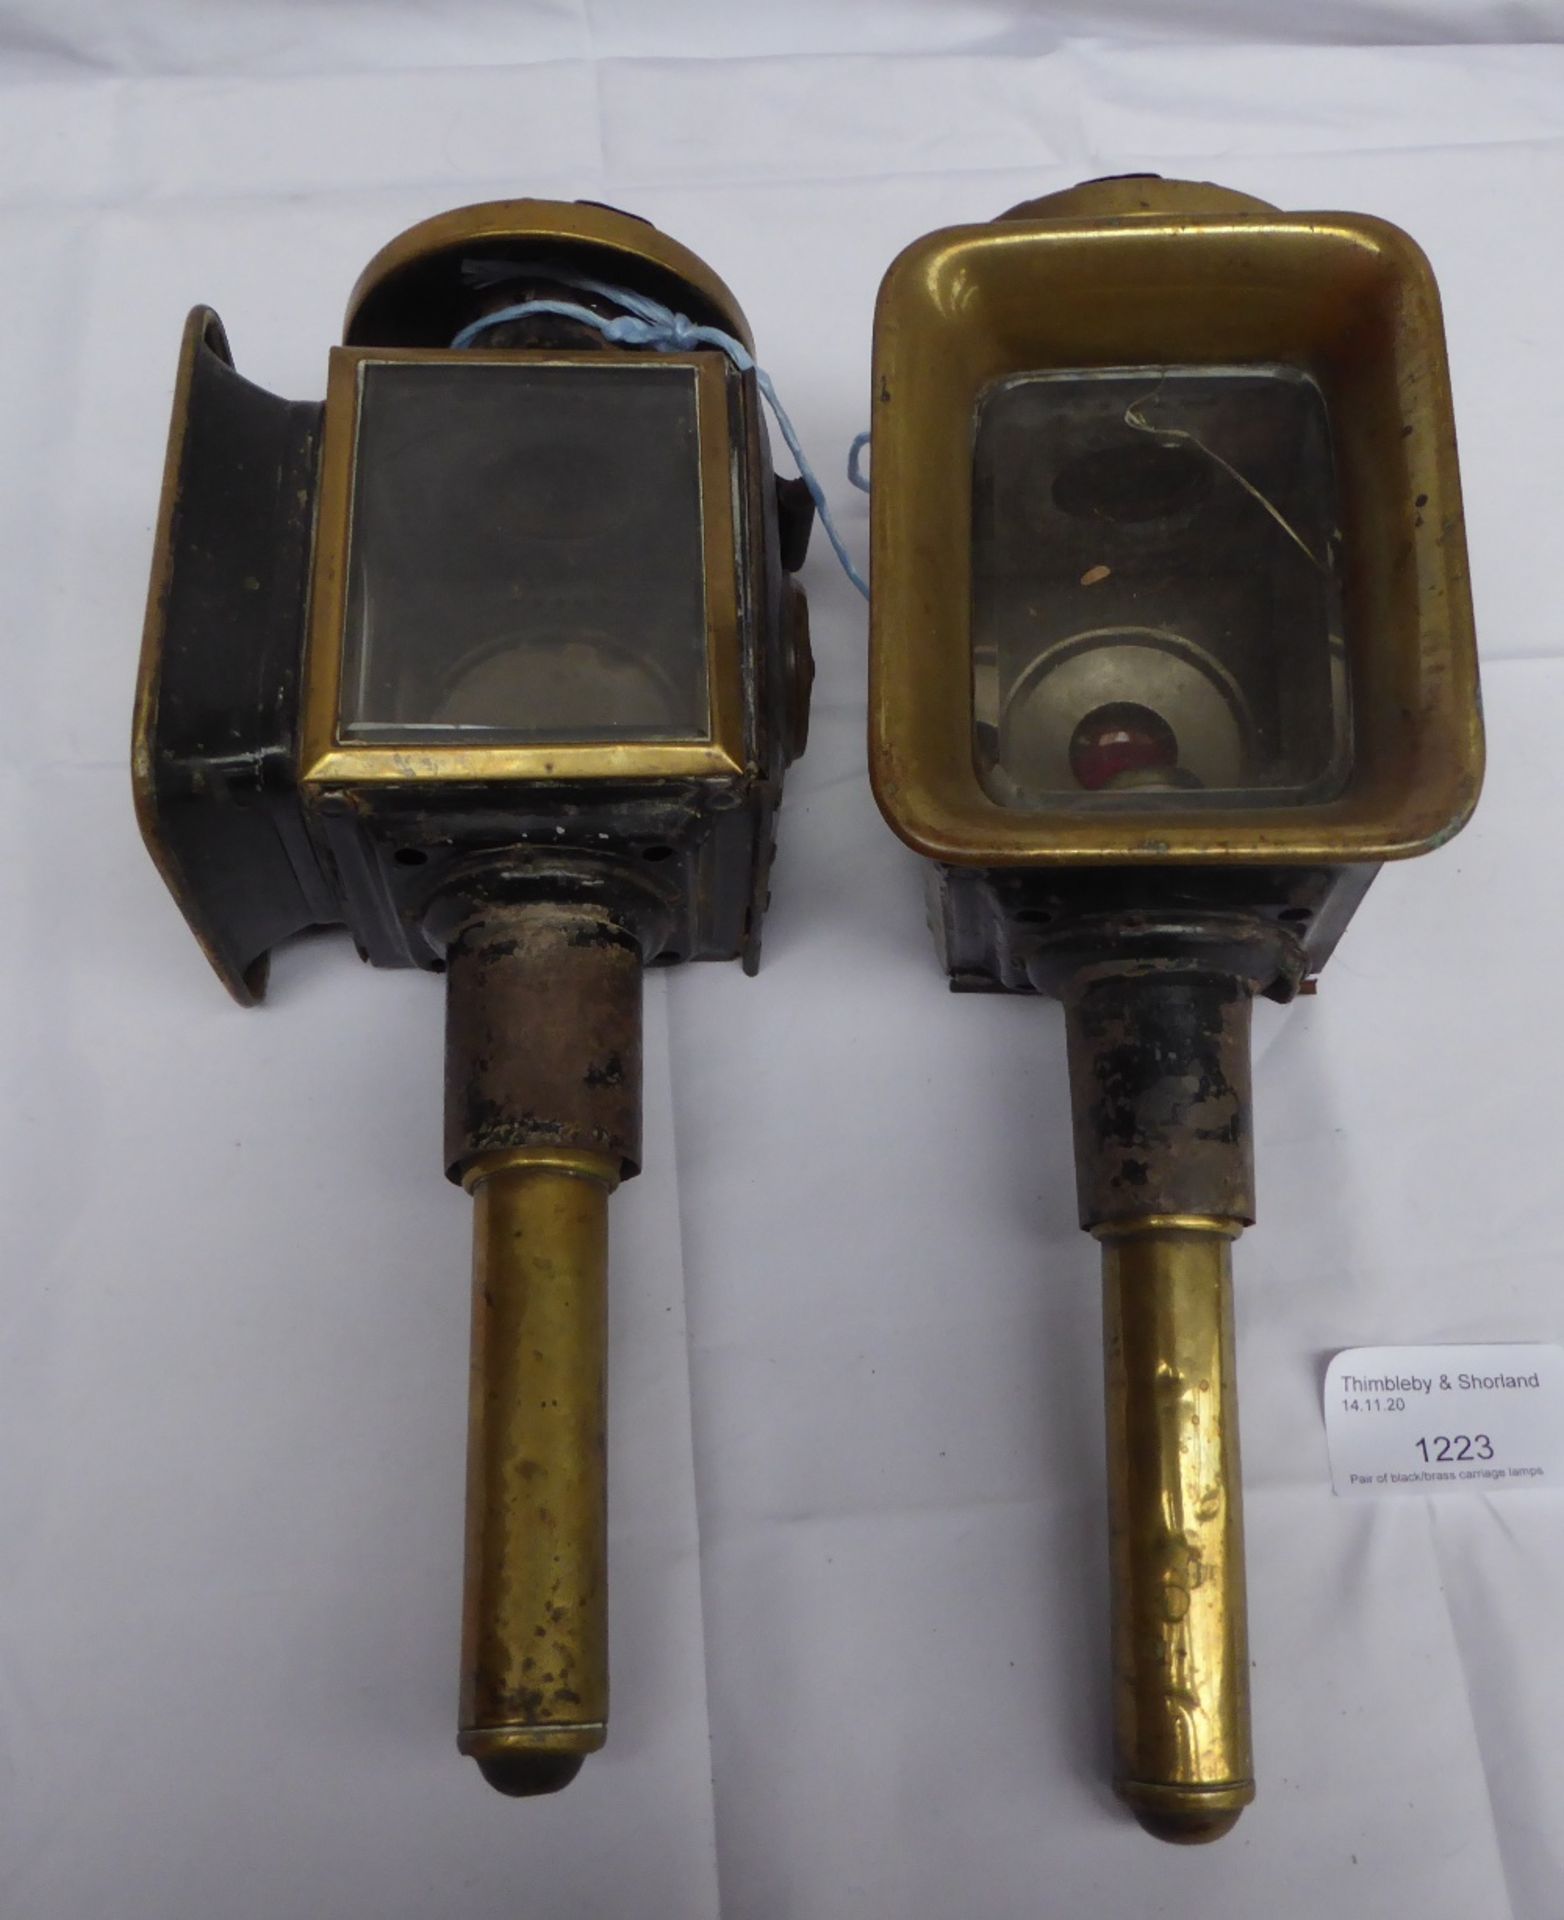 Pair of black/brass carriage lamps with square fronts; crack in one lens - carries VAT